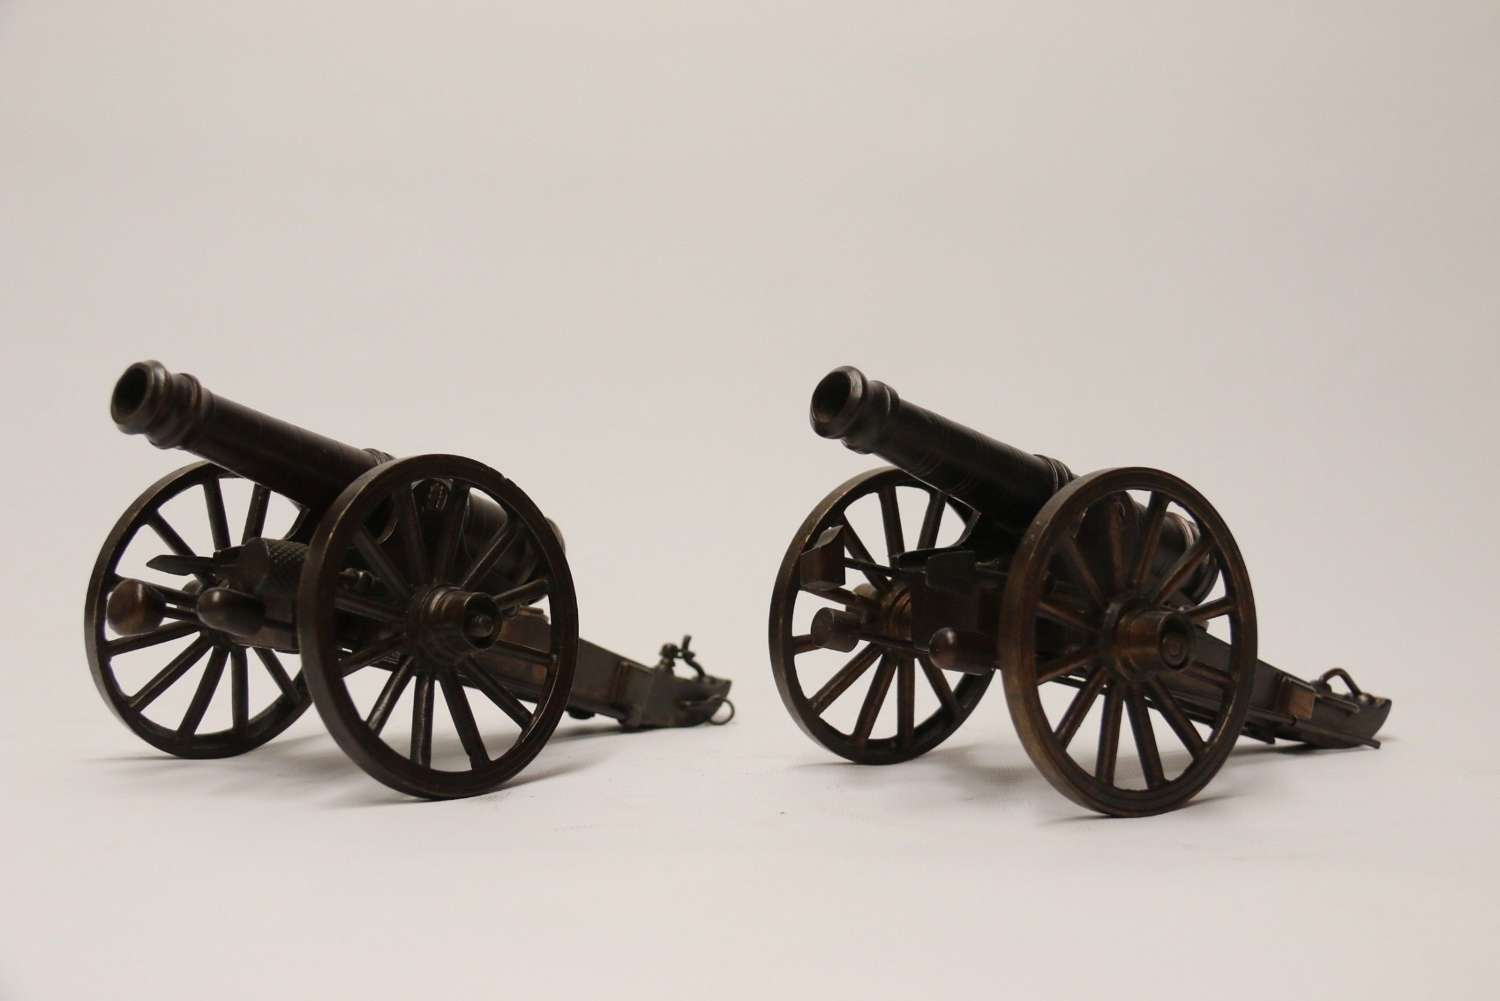 A Rare Pair Of French Mid 19th C Bronze Model Cannons